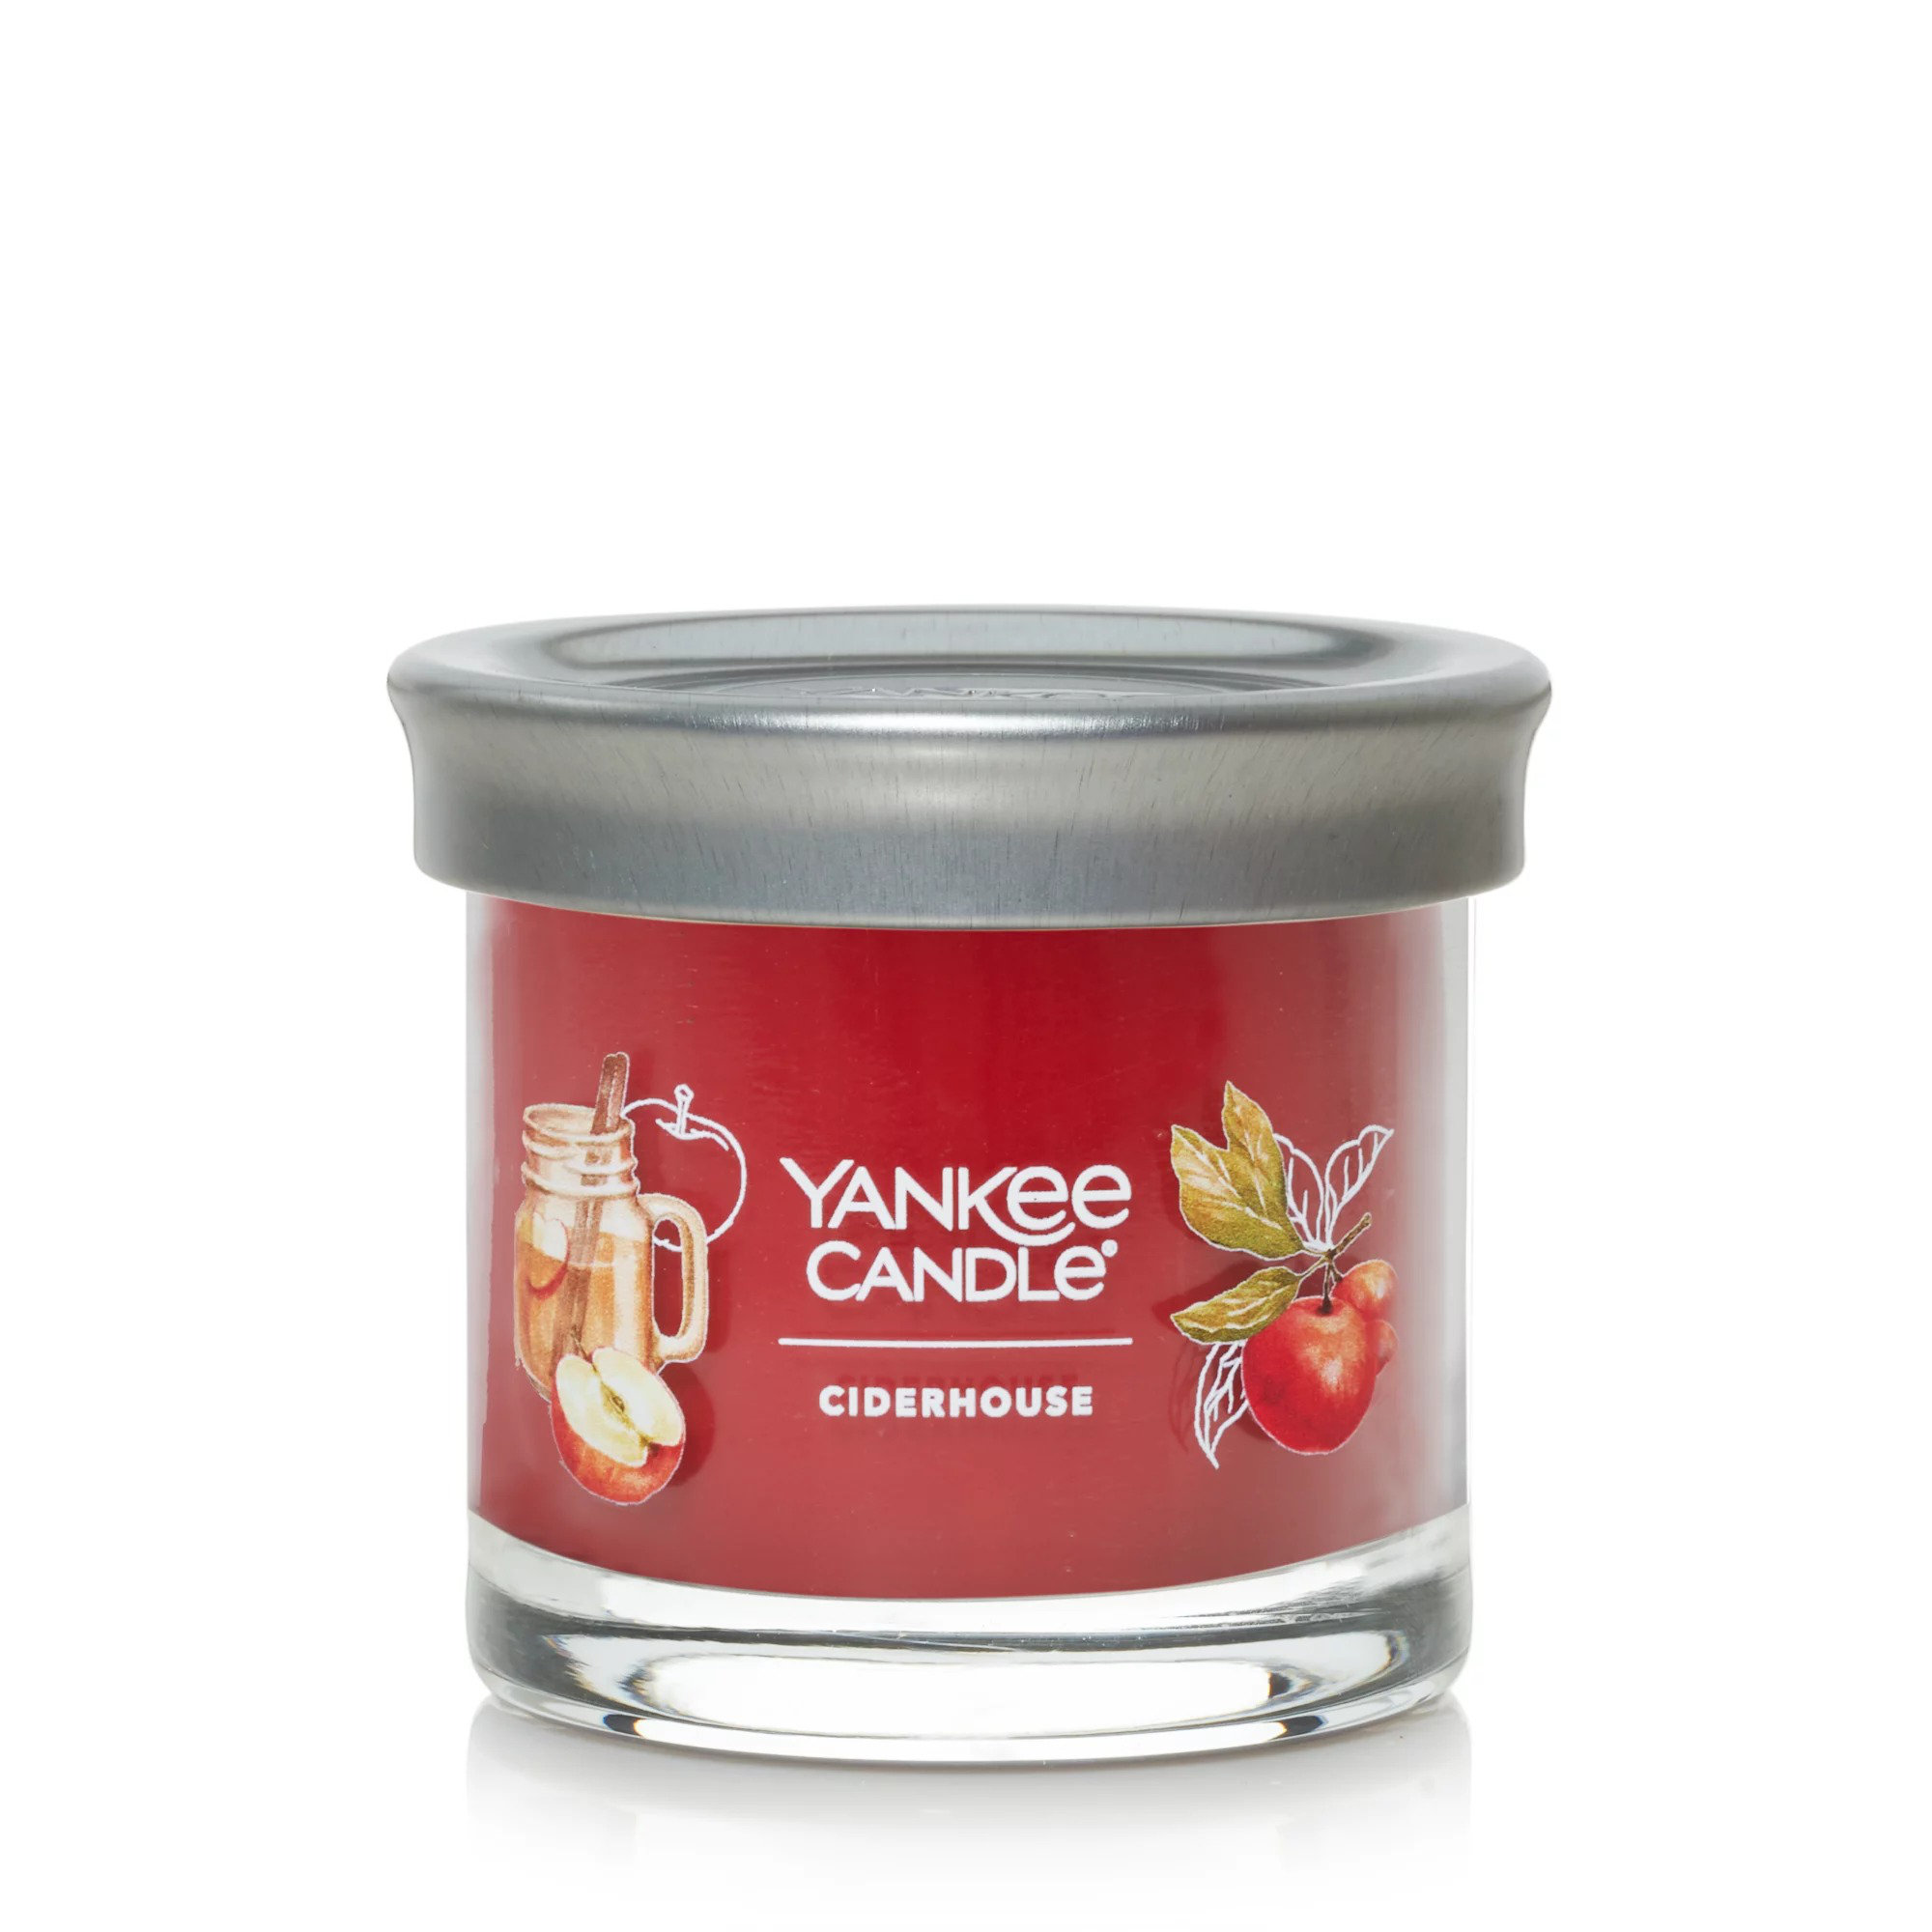 Yankee Candle Ciderhouse Signature Small Tumbler Candle & Reviews